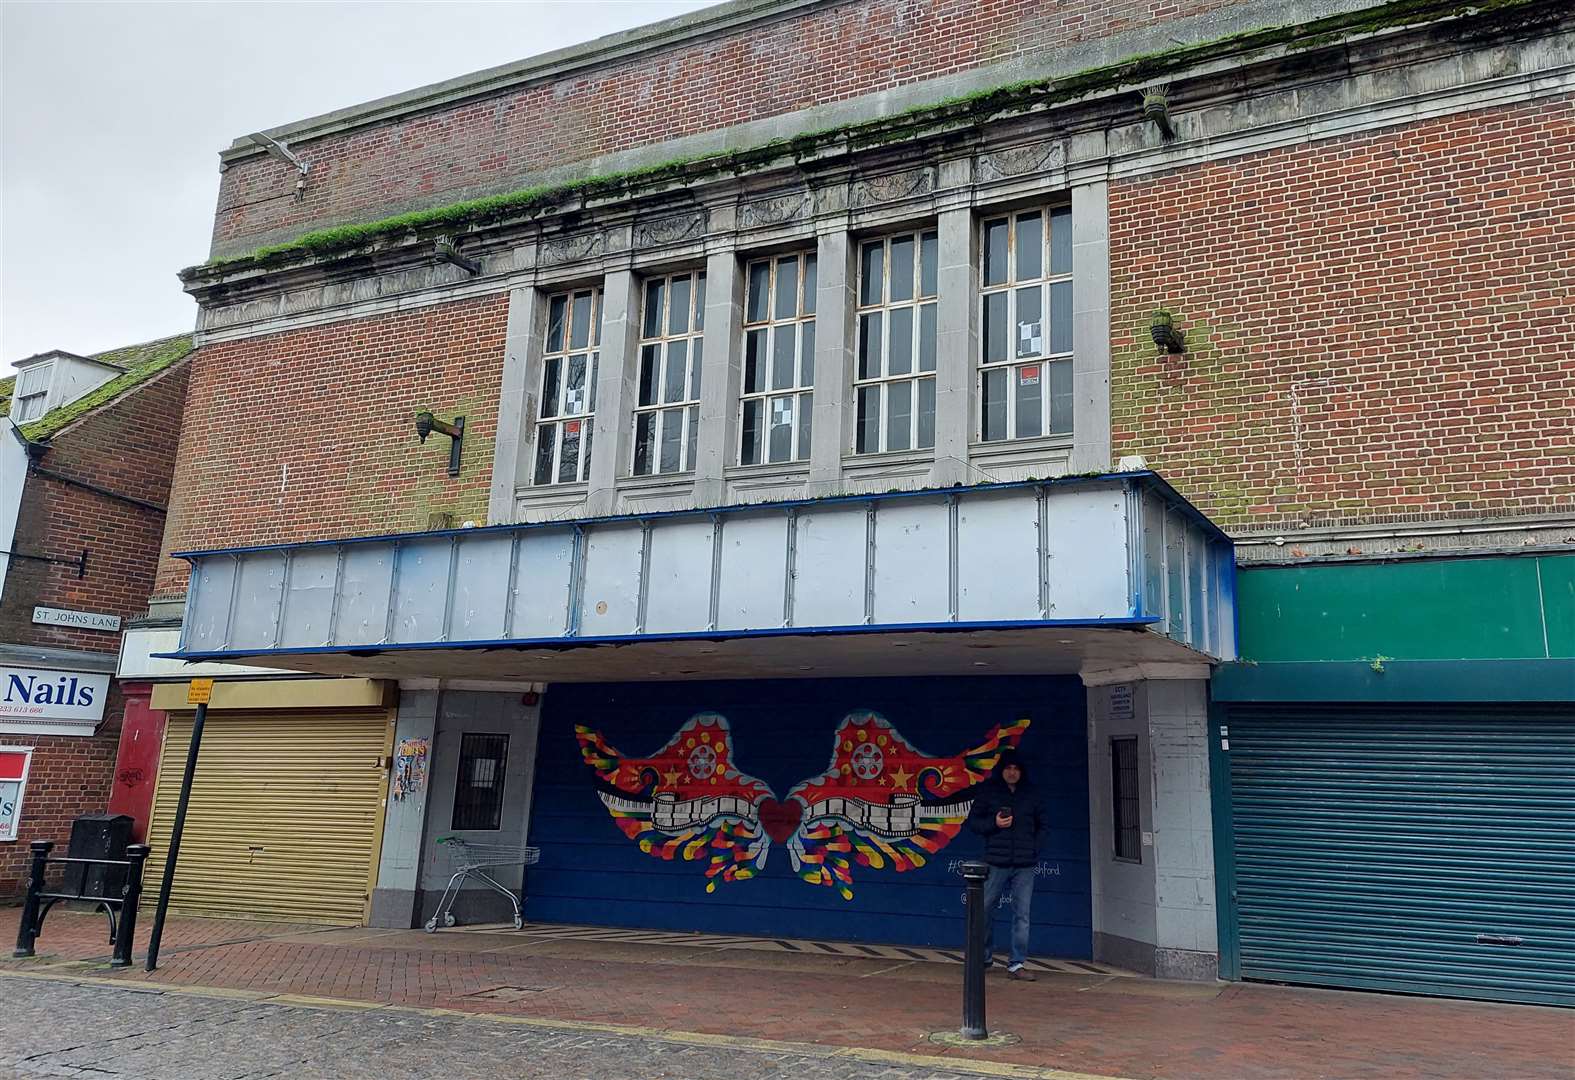 How the prime Lower High Street site currently looks; the wings artwork will be replaced next week